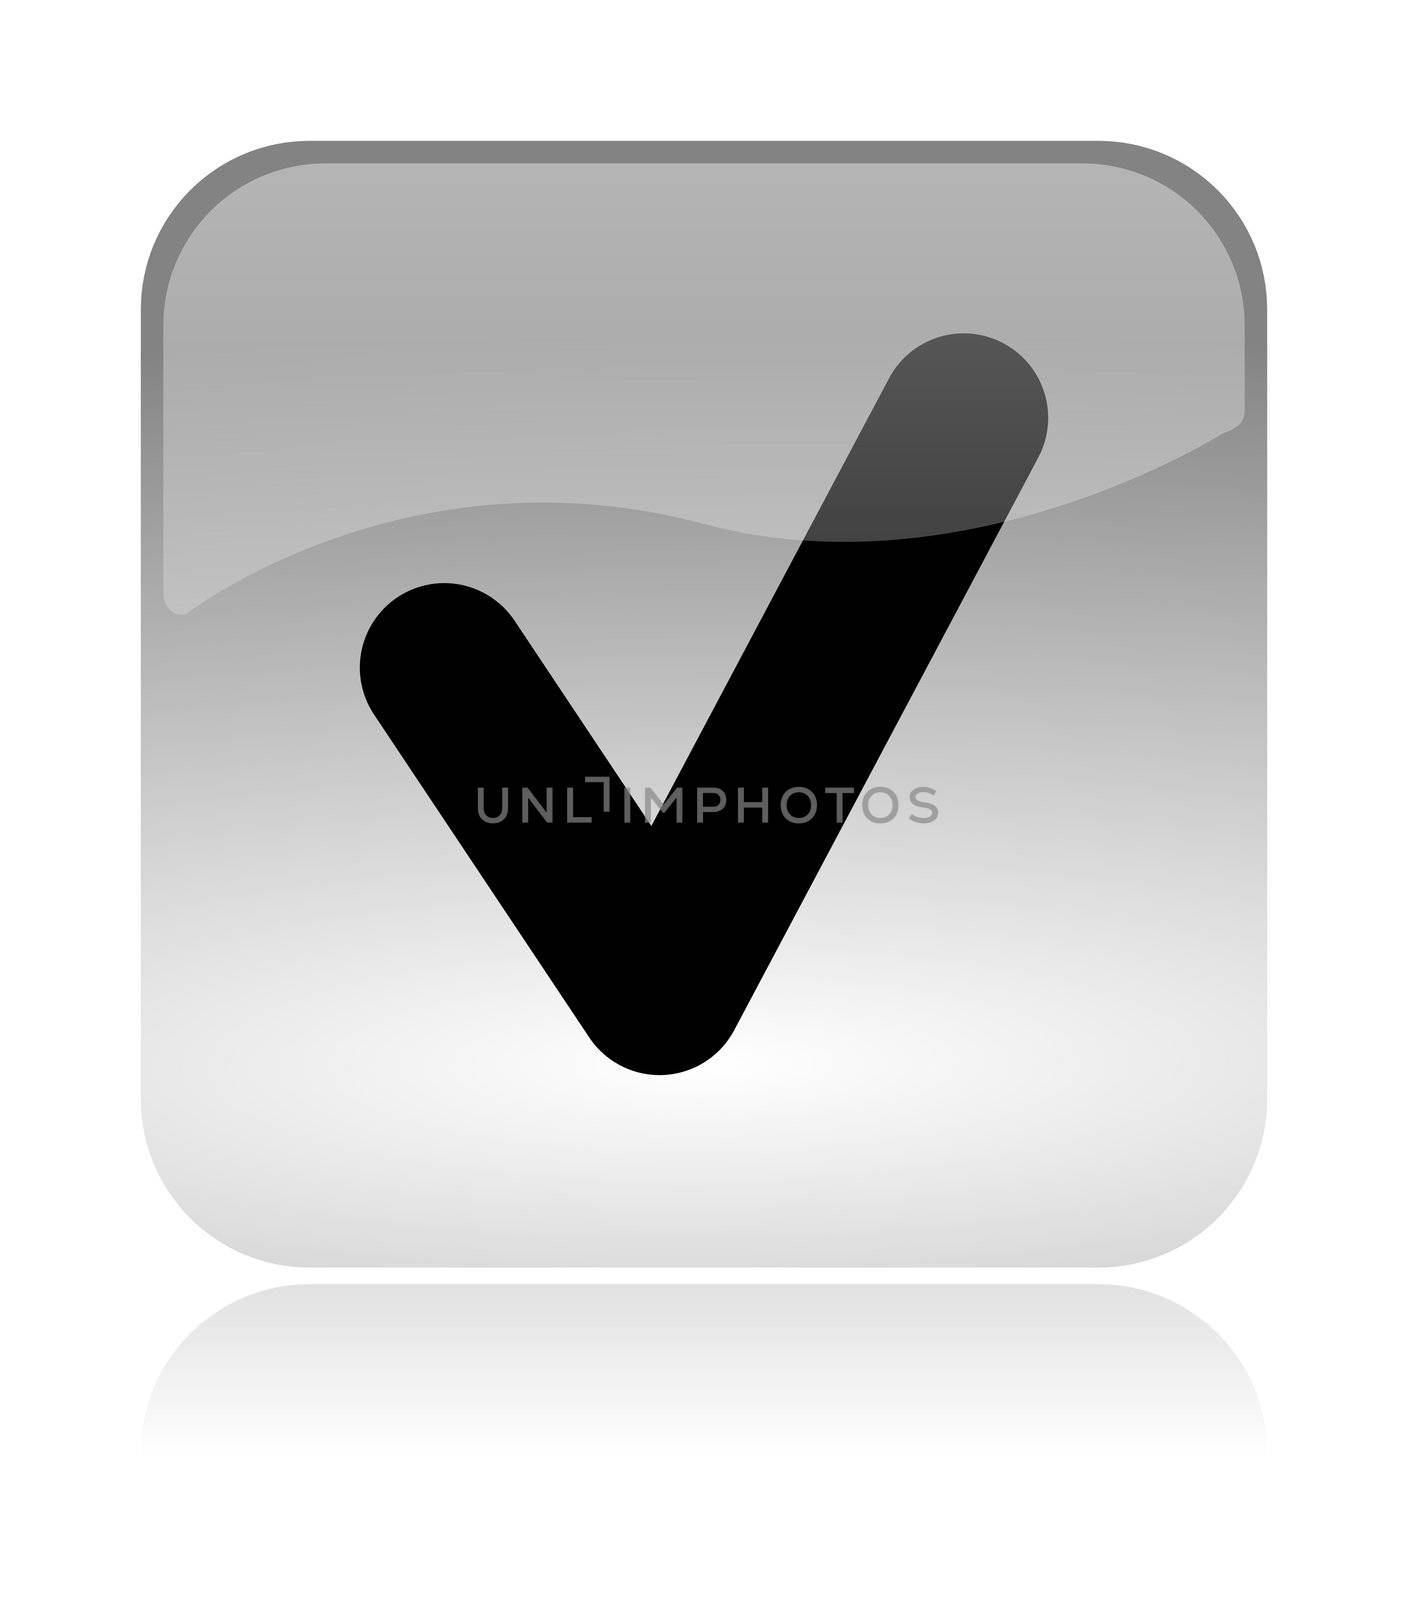 Check, approved, web interface icon by make